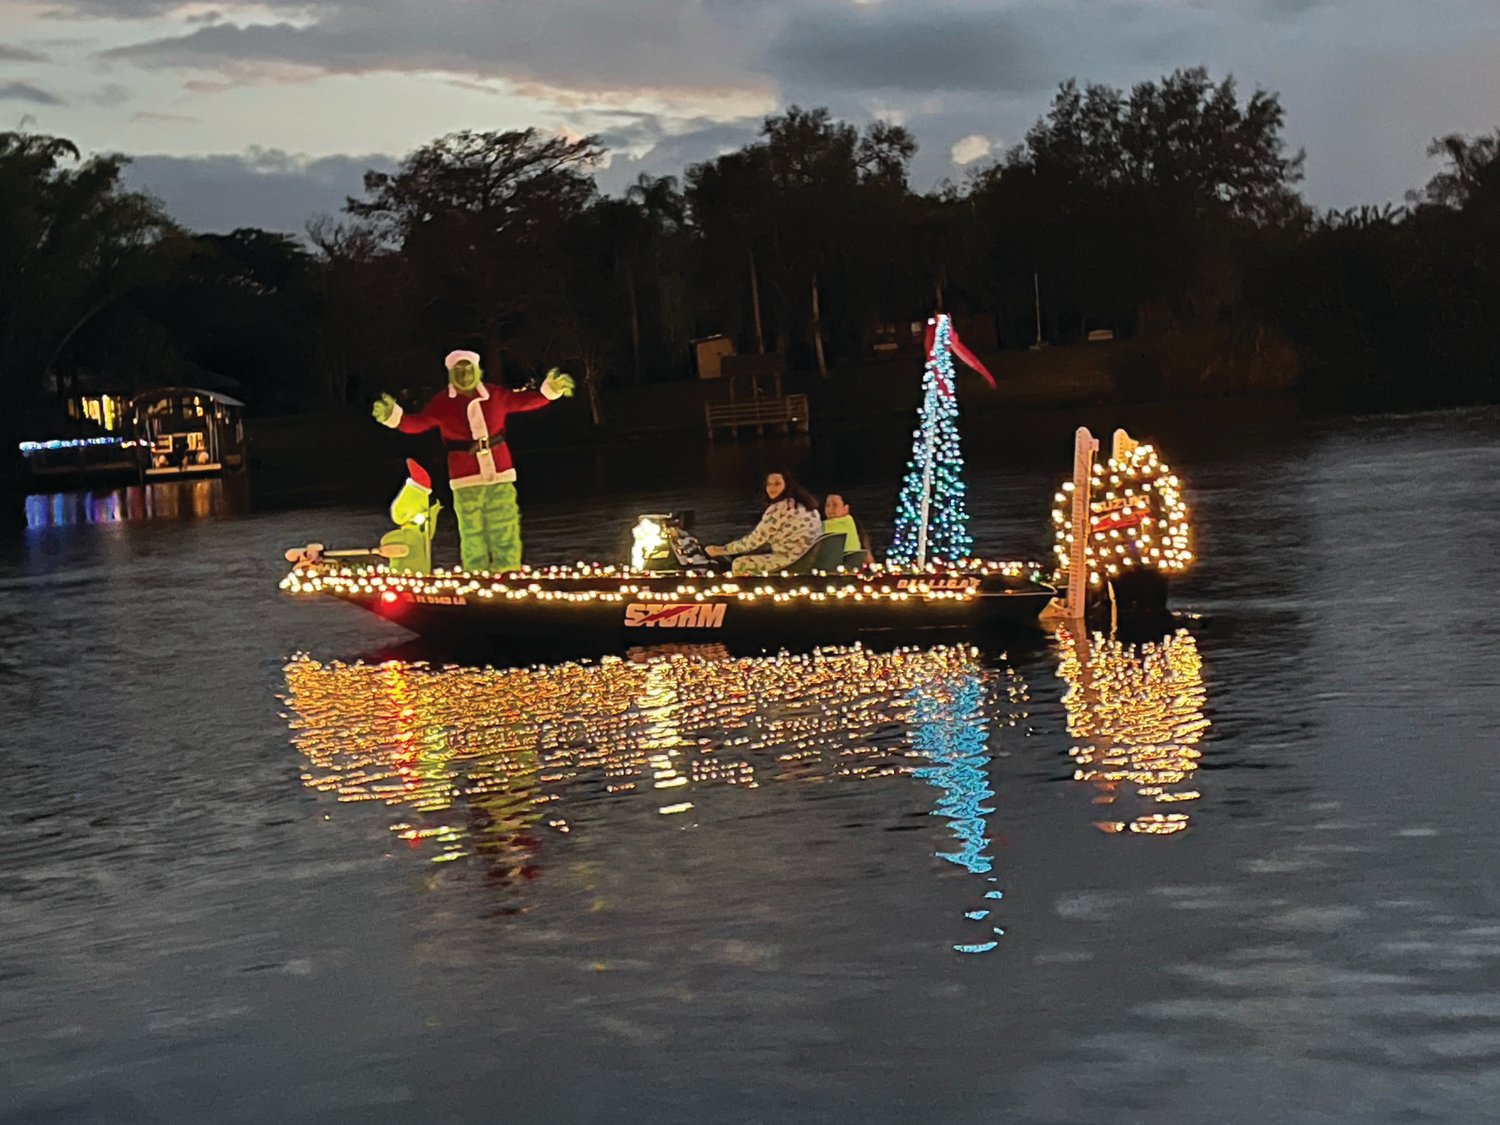 LABELLE – Lights reflecting on the water created a magical scene on the Caloosahatchee River on Dec. 18.